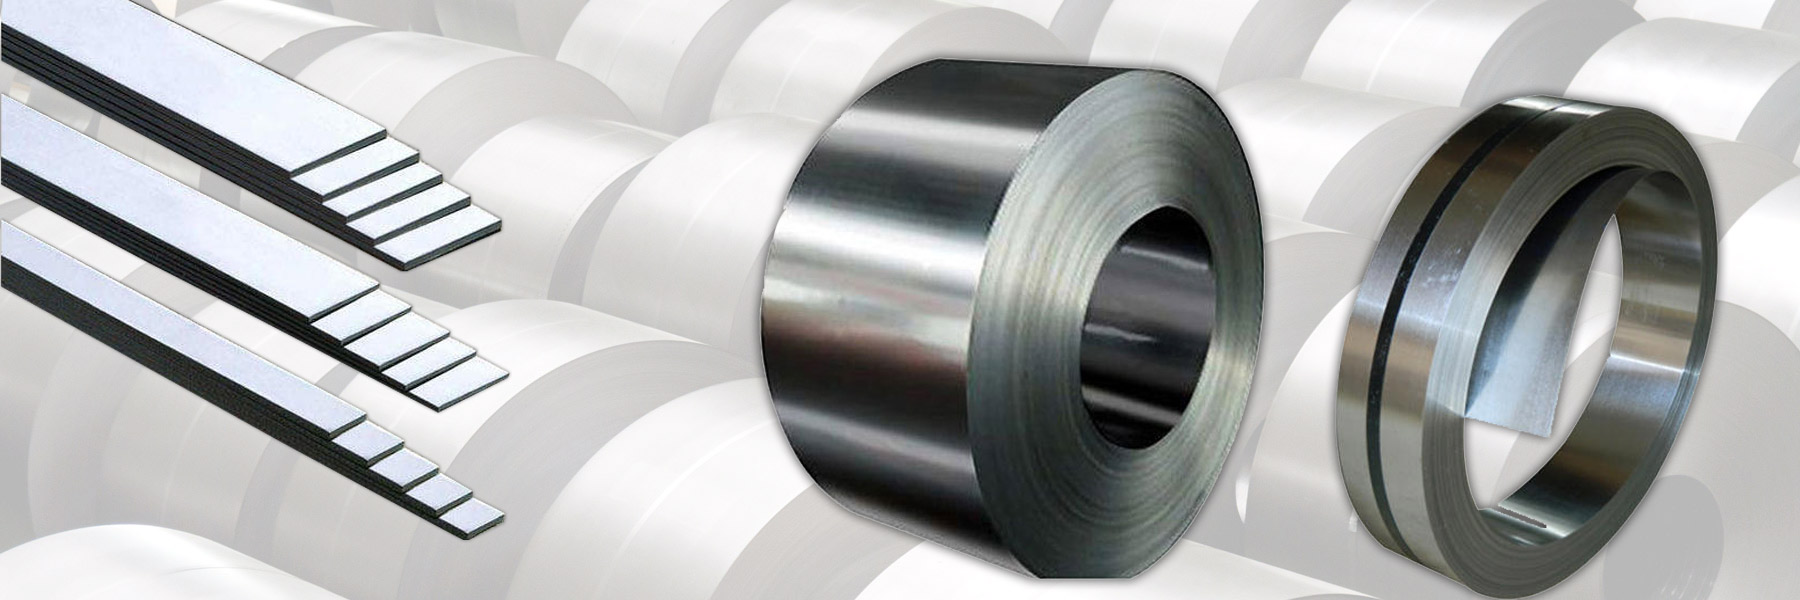 Stainless Steel Coils Manufacturers, Suppliers, Exporters & Importers Mumbai India